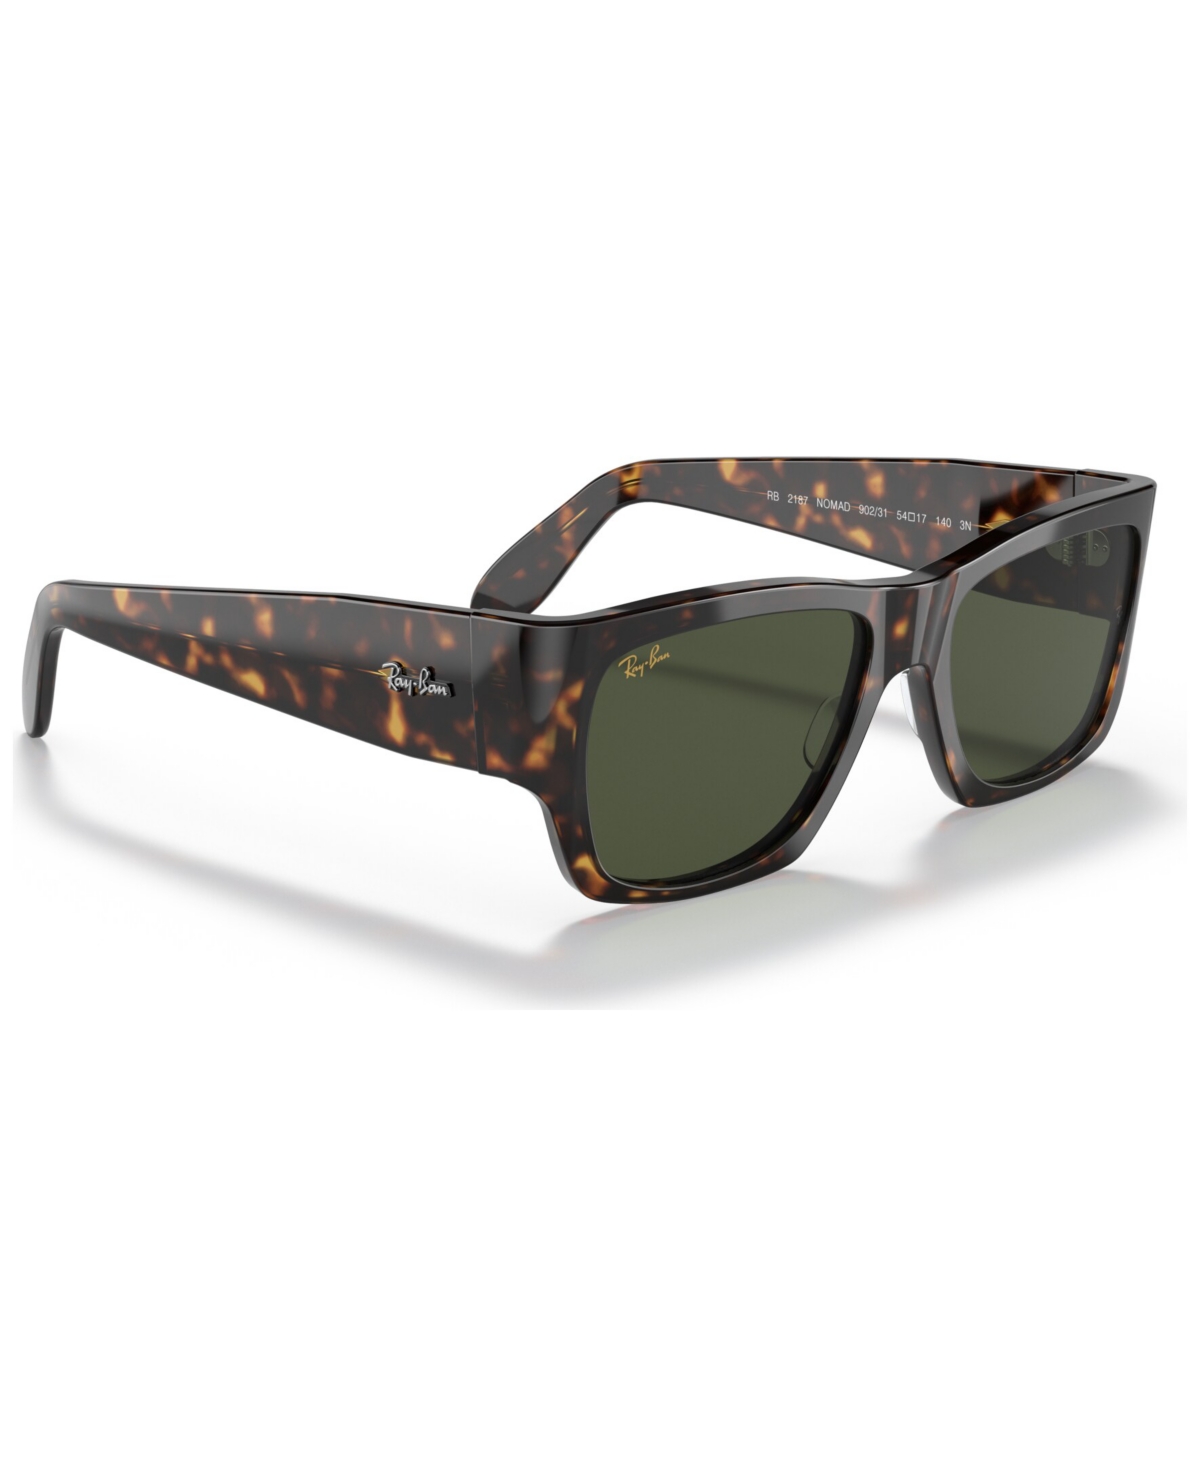 Ray Ban Unisex Nomad Reloaded Sunglasses, Rb2187 In Brown